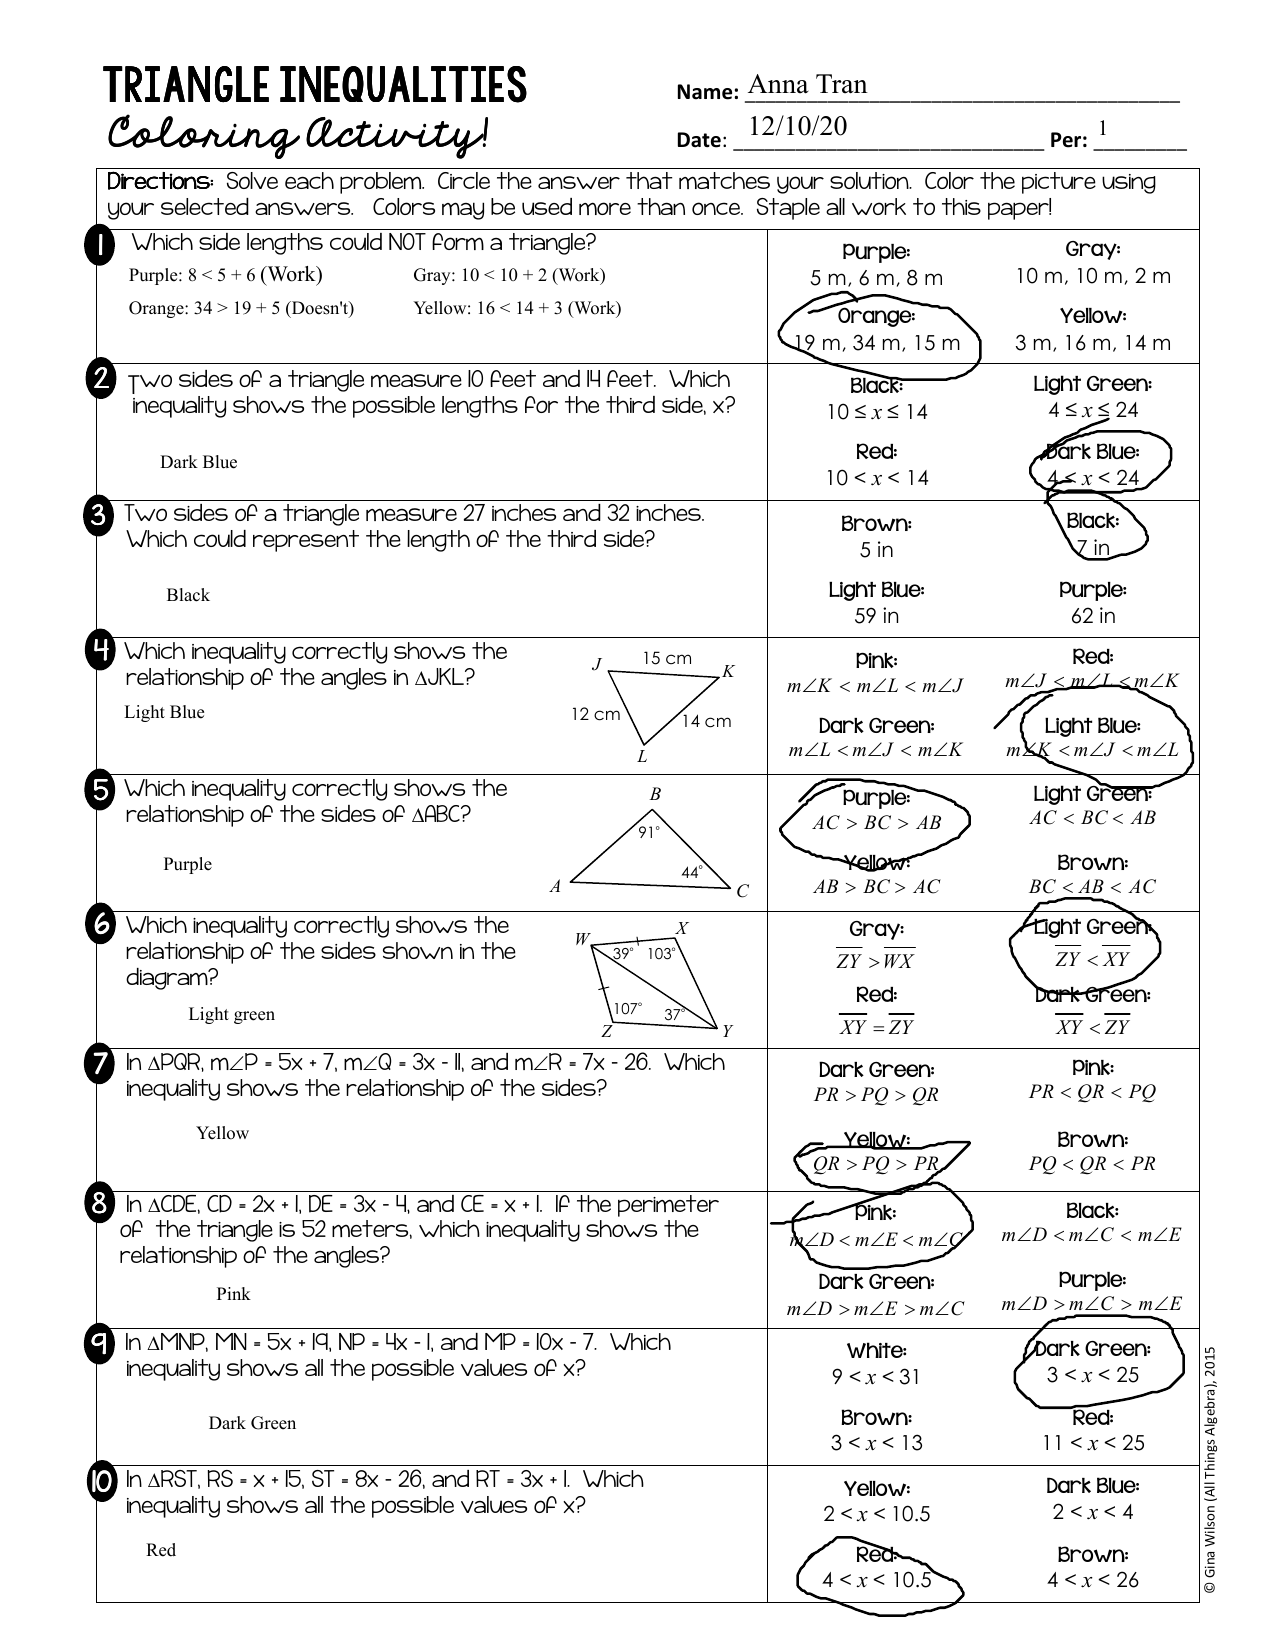 Coloring Activity Geometry Triangle Inequalities Throughout Triangle Inequality Theorem Worksheet